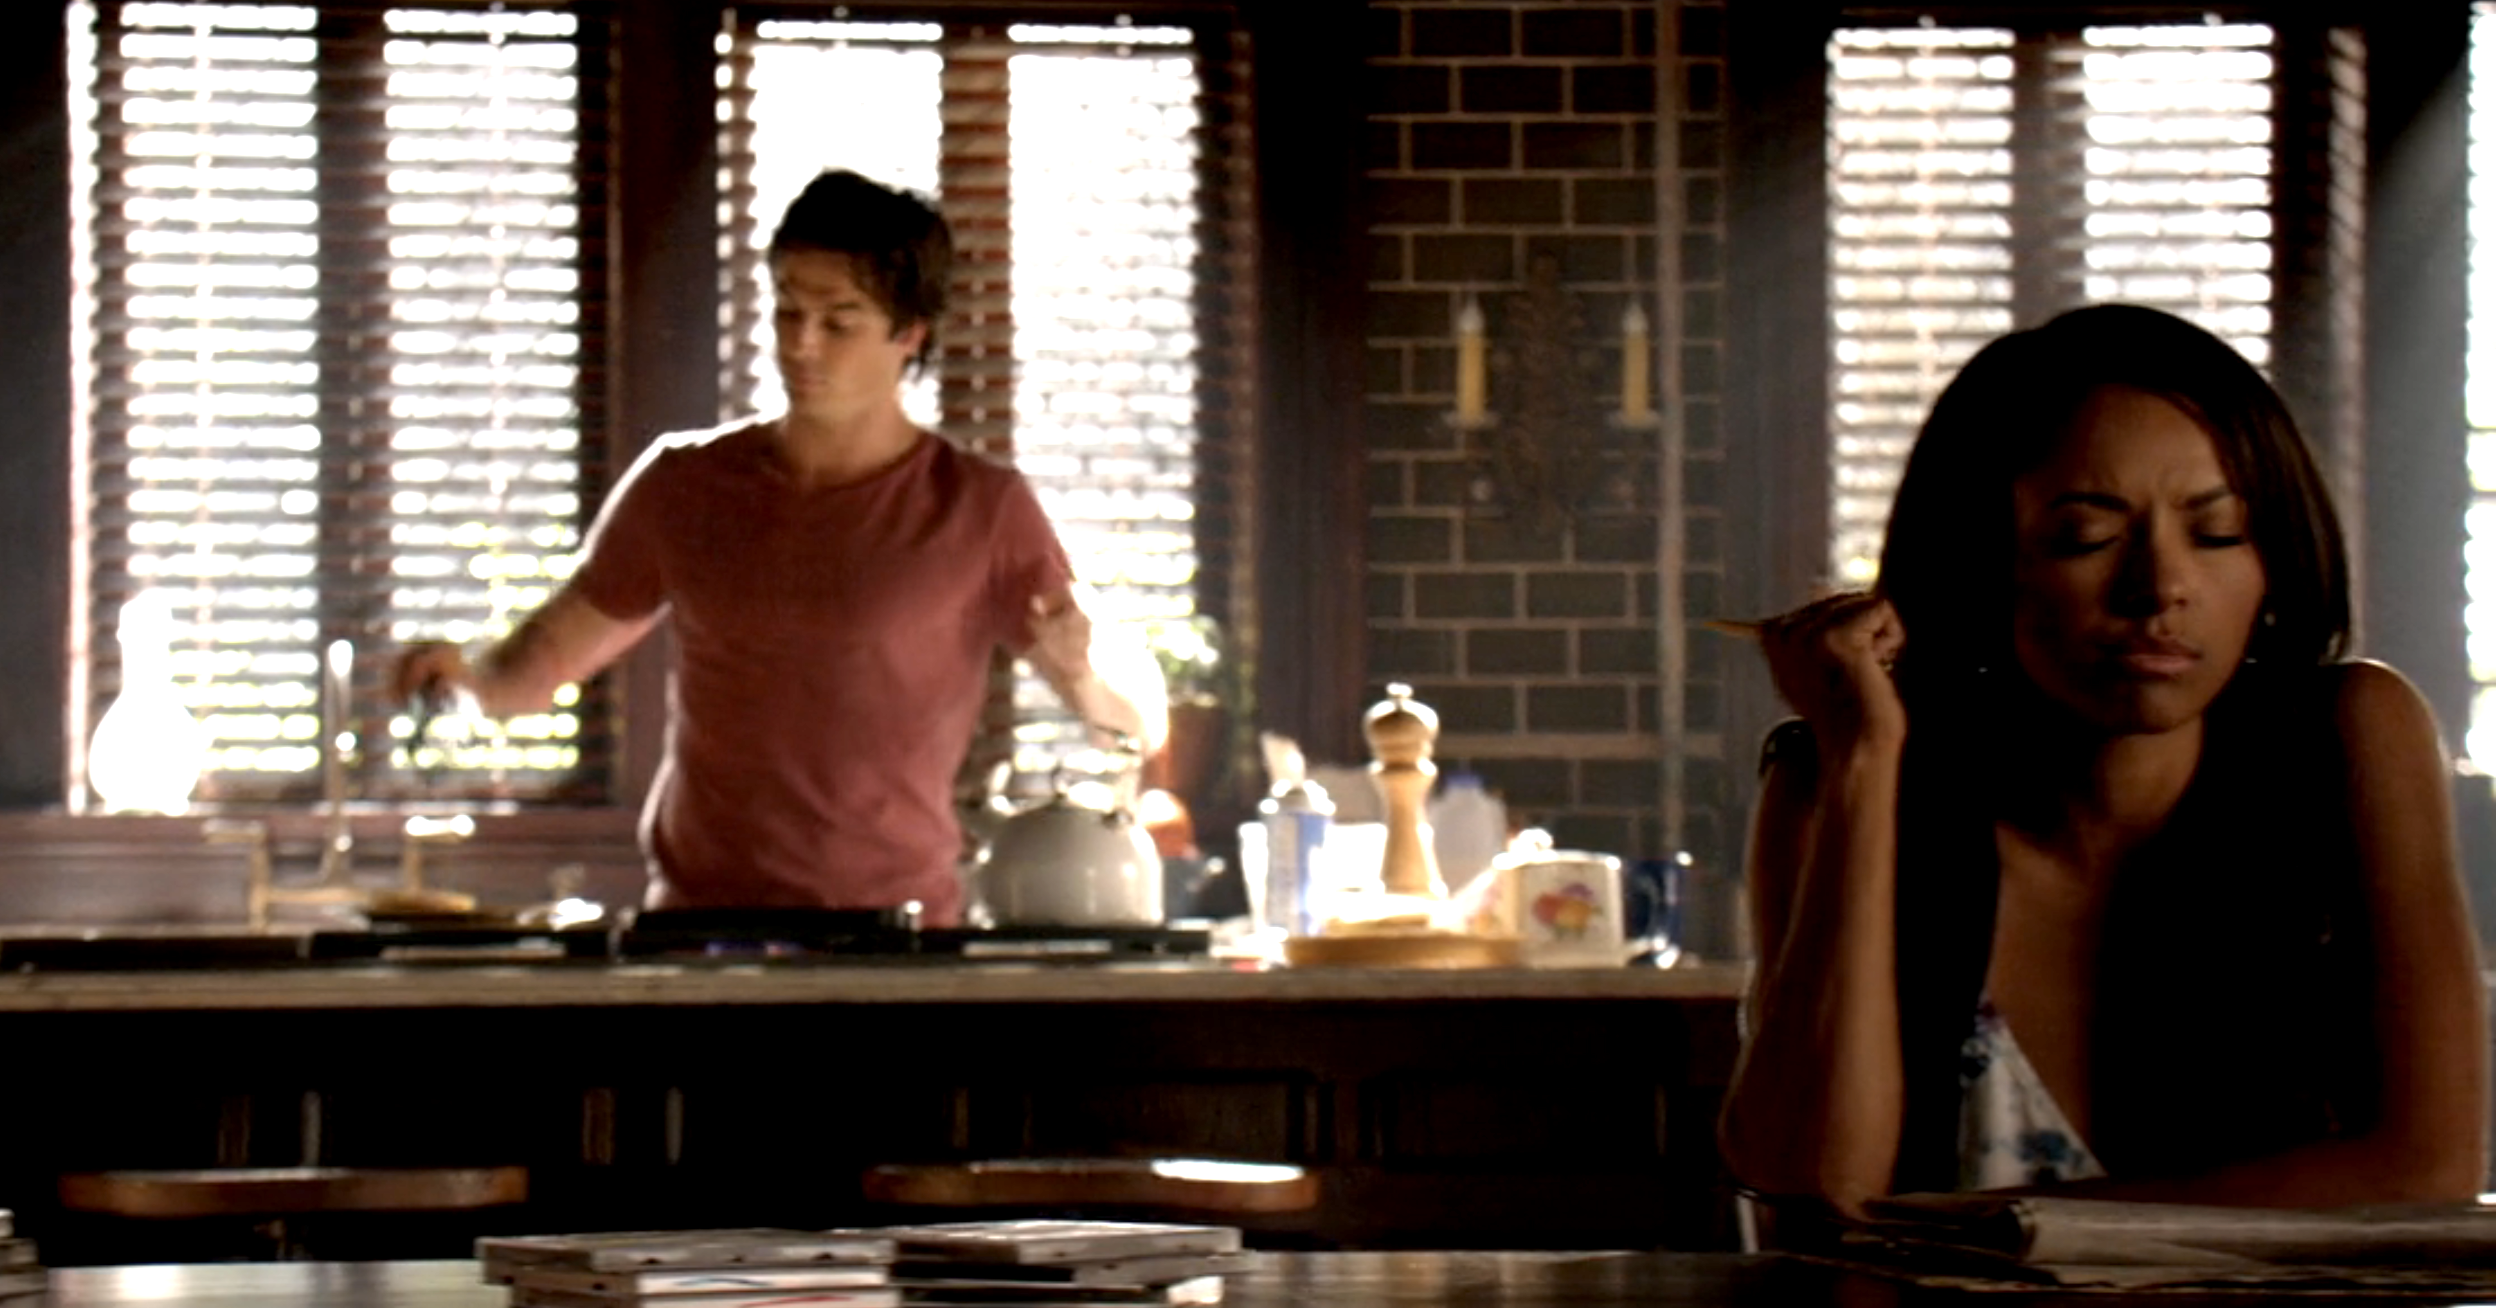 Damon making pancakes while Bonnie sits at the table thinking